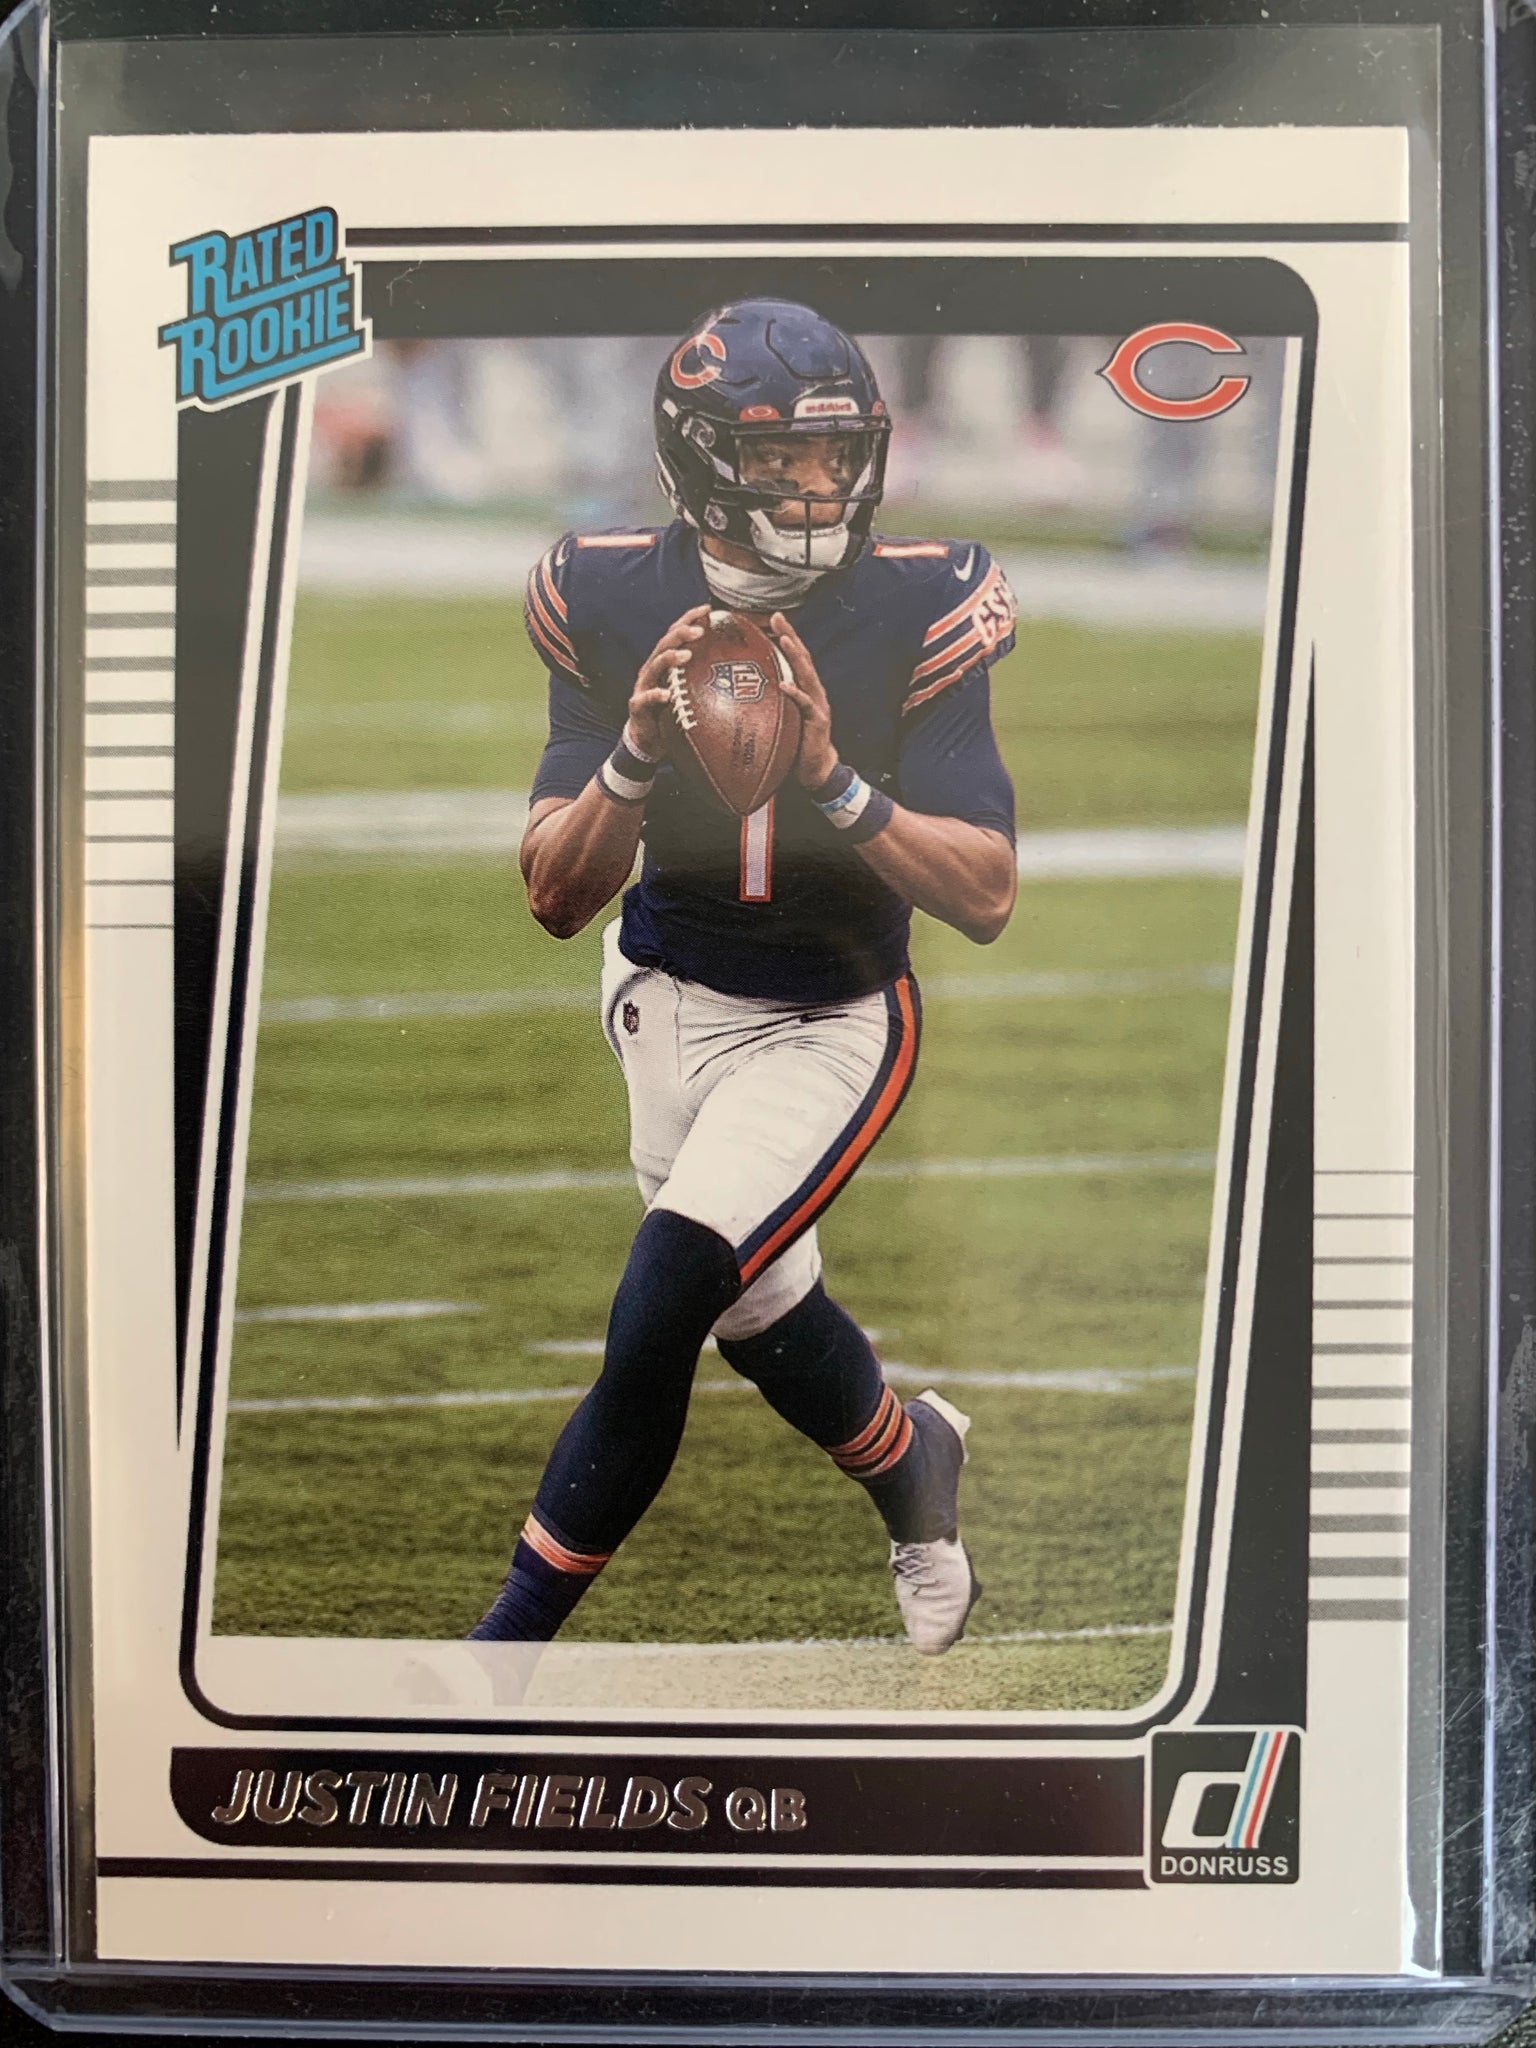 2021 PANINI DONRUSS FOOTBALL #253 CHICAGO BEARS - JUSTIN FIELDS BASE RATED ROOKIE CARD